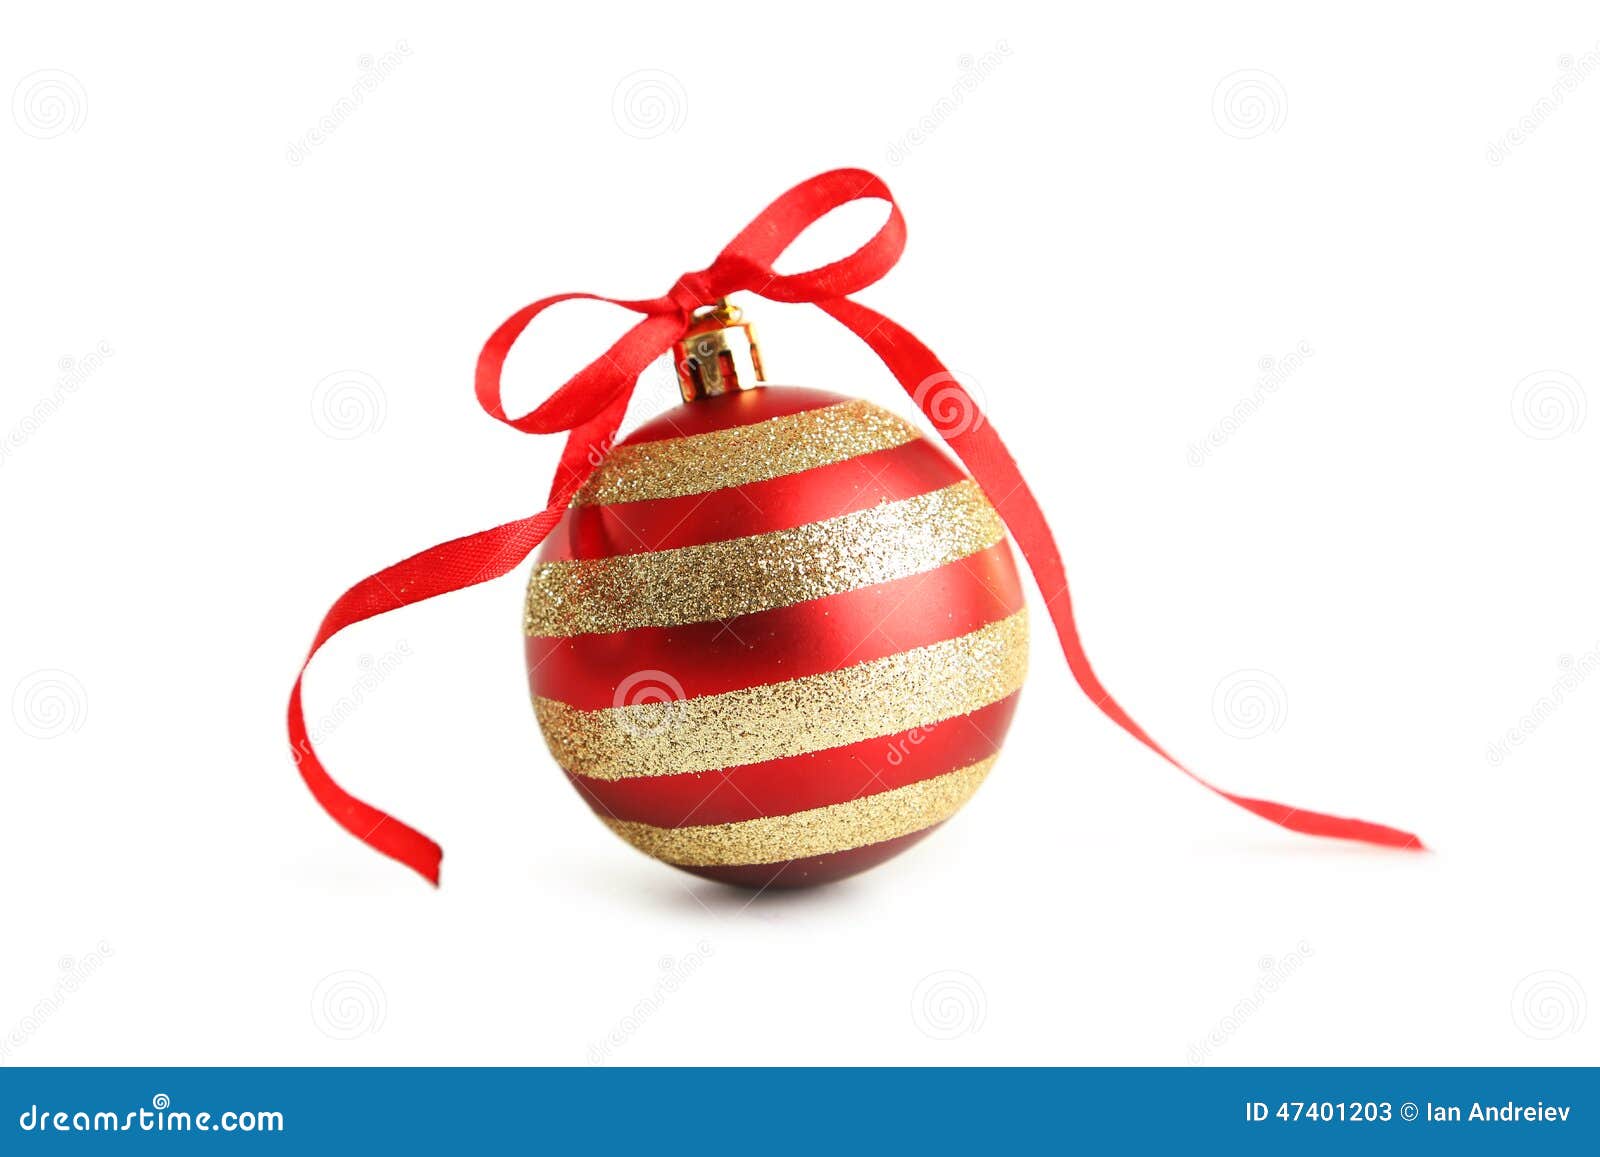 Red Christmas Ball Isolated on White Background Stock Image - Image of ...